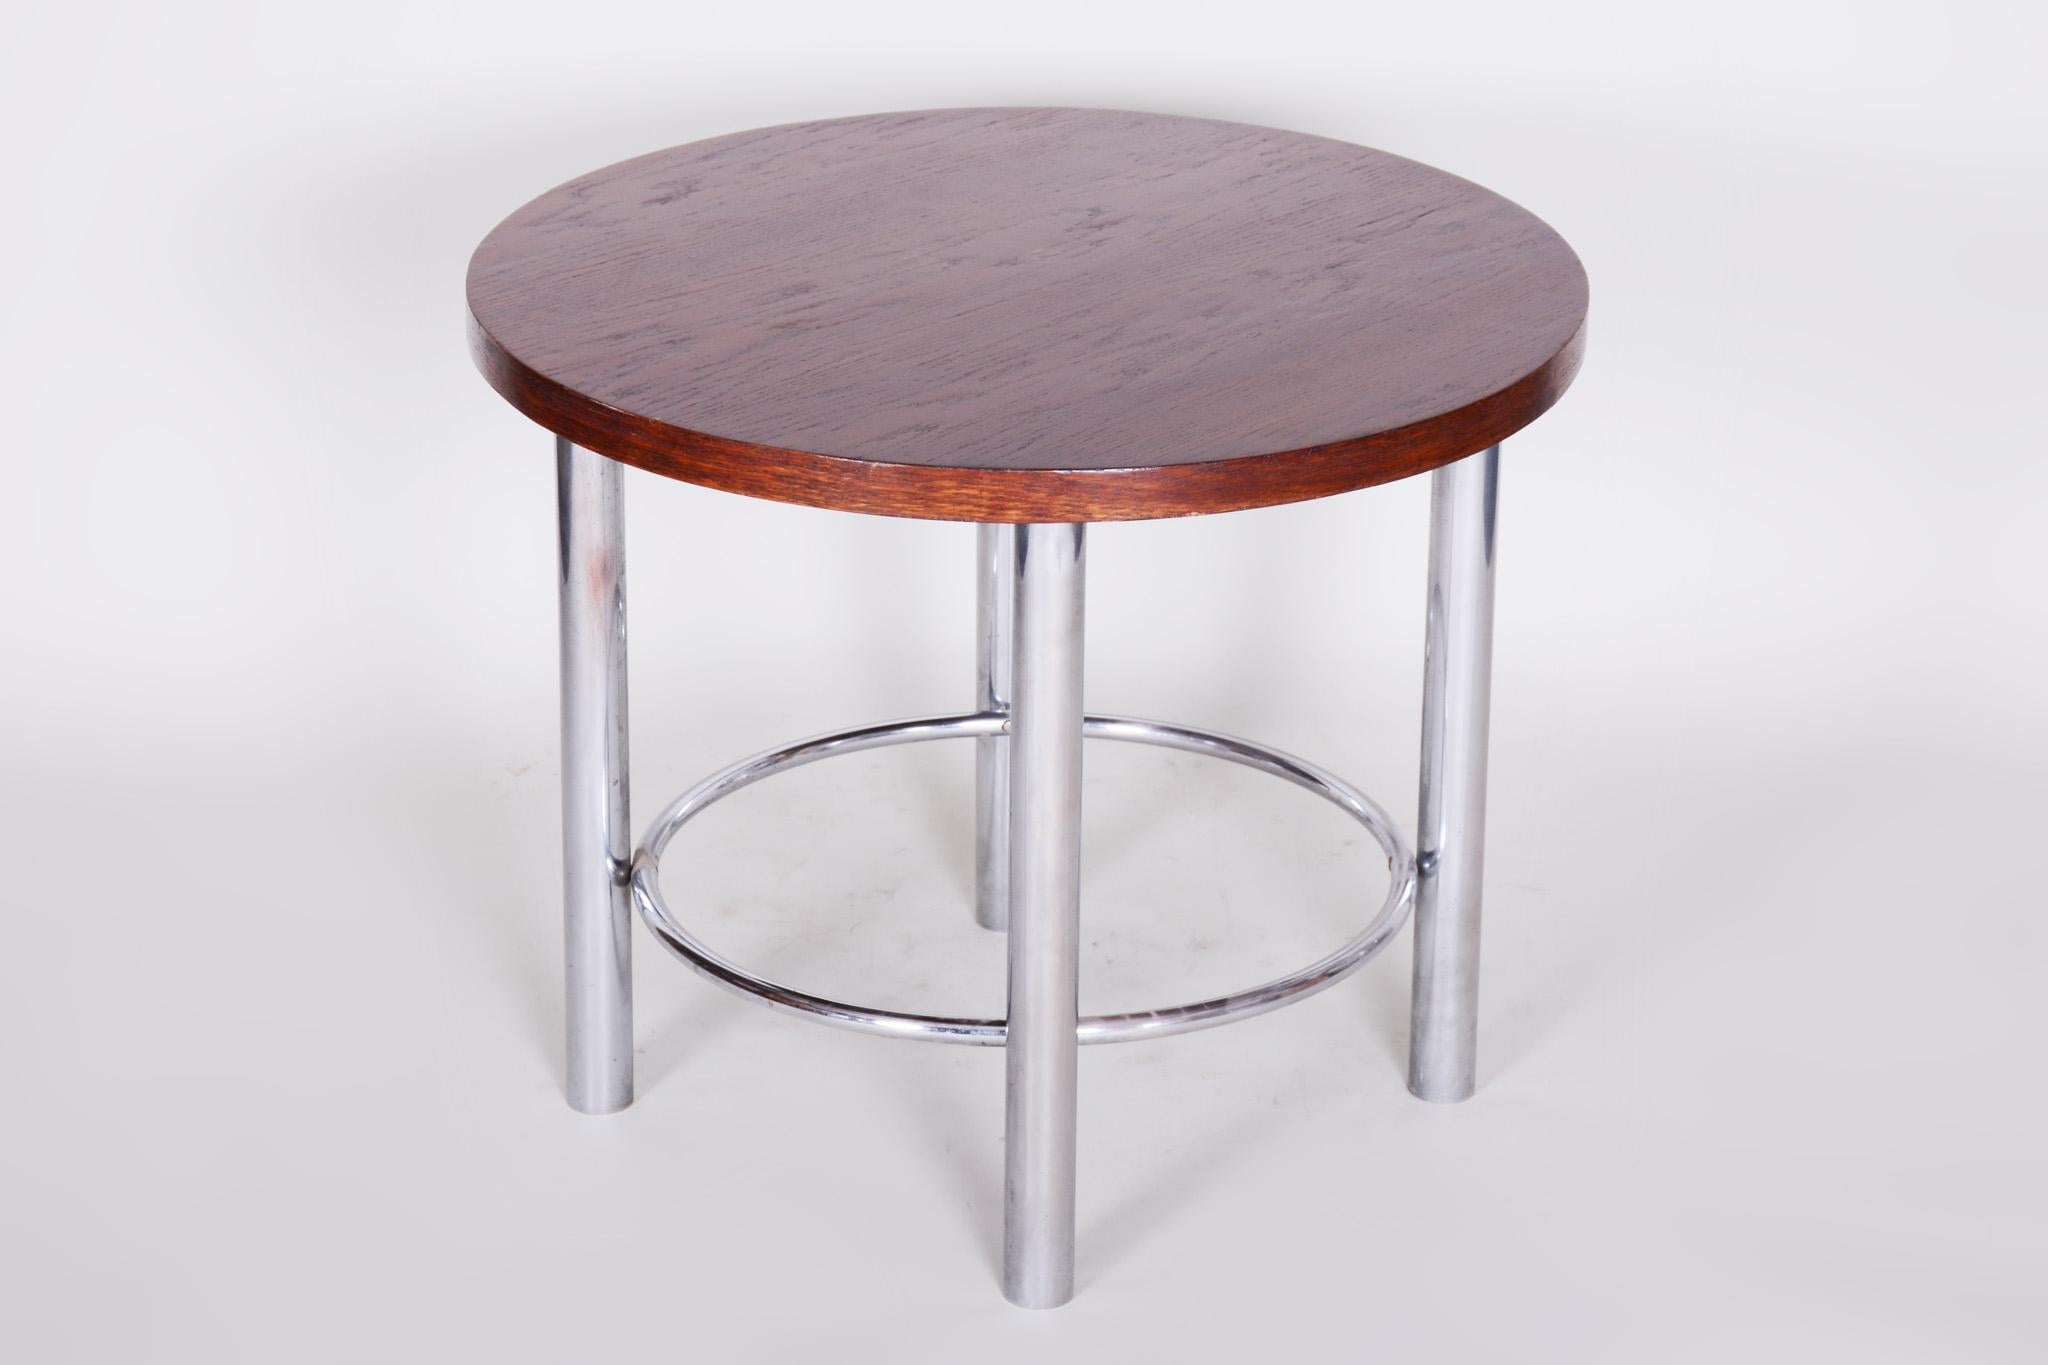 Restored Czech Round Oak Bauhaus Table by Mücke & Melder, Chrome, 1930s In Good Condition For Sale In Horomerice, CZ